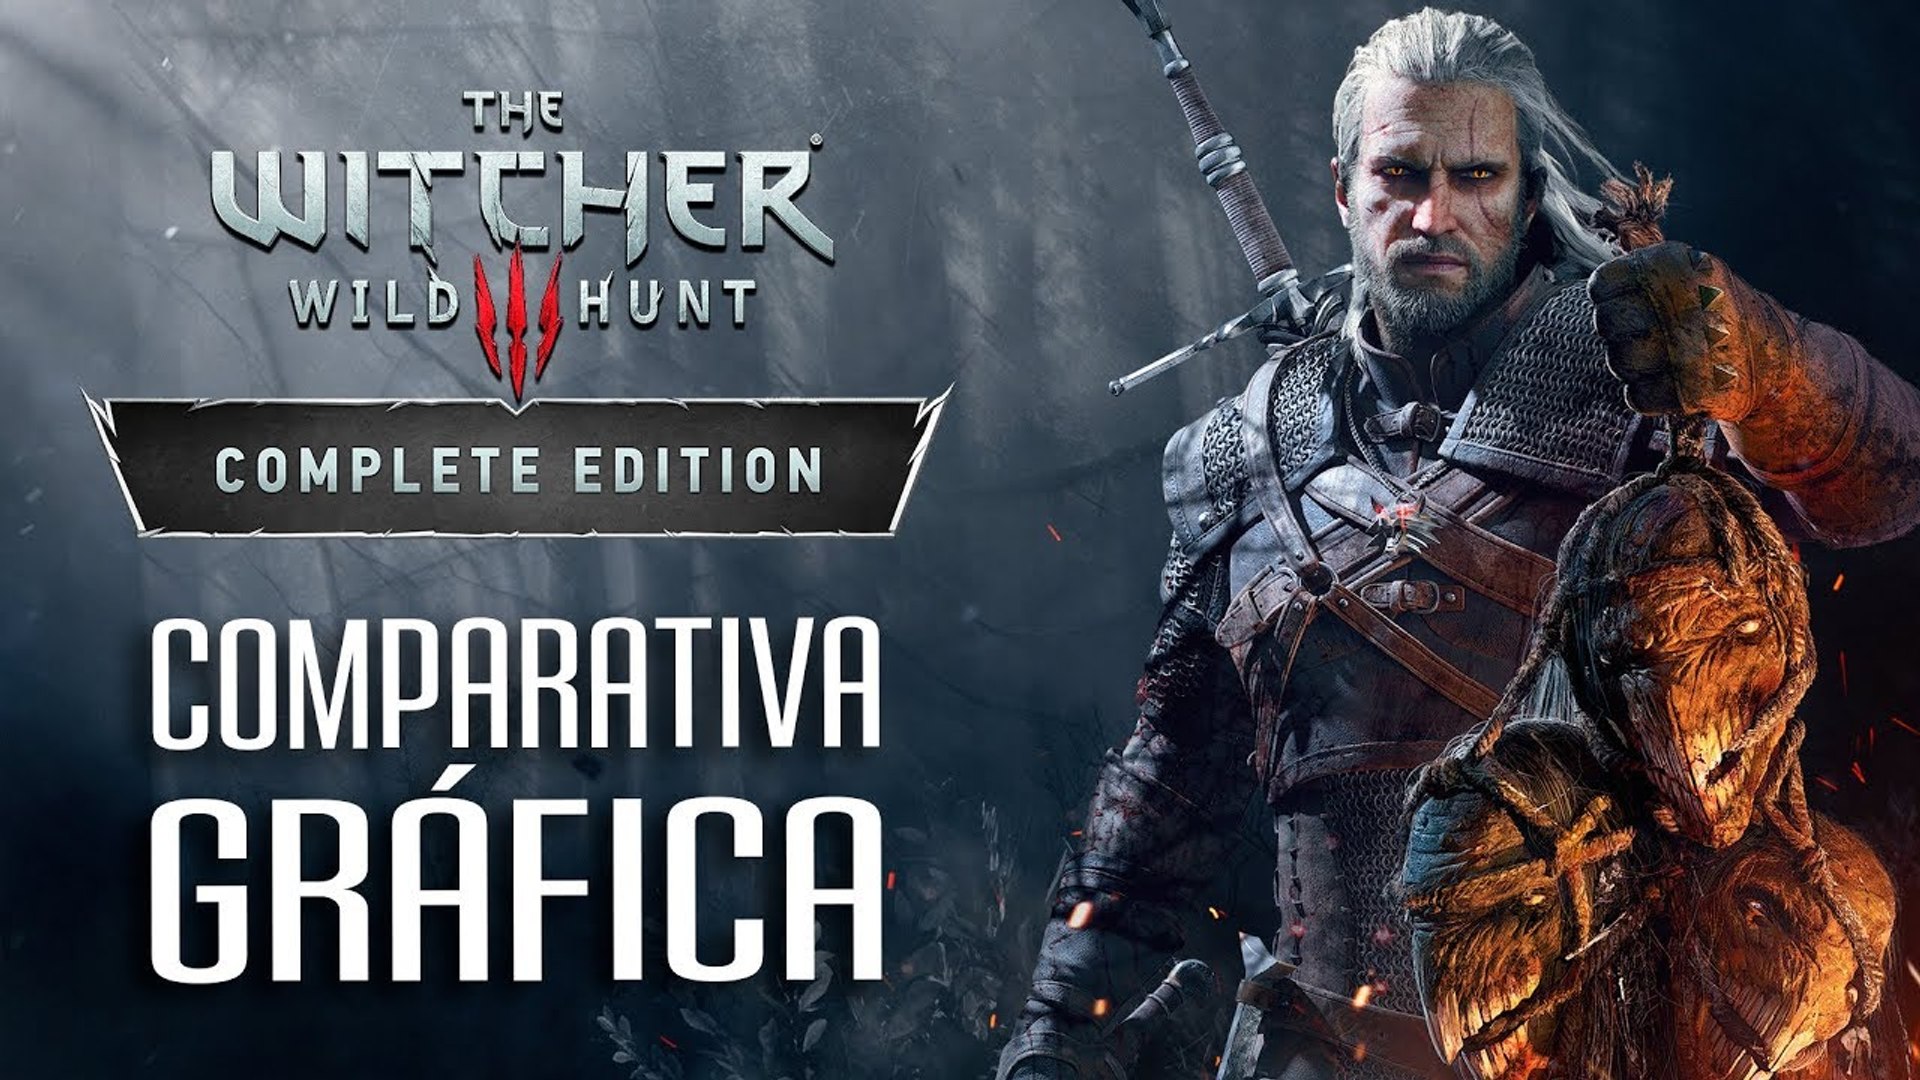 The Witcher 3 Wild Hunt Comparativa Gráfica - Vídeo Dailymotion